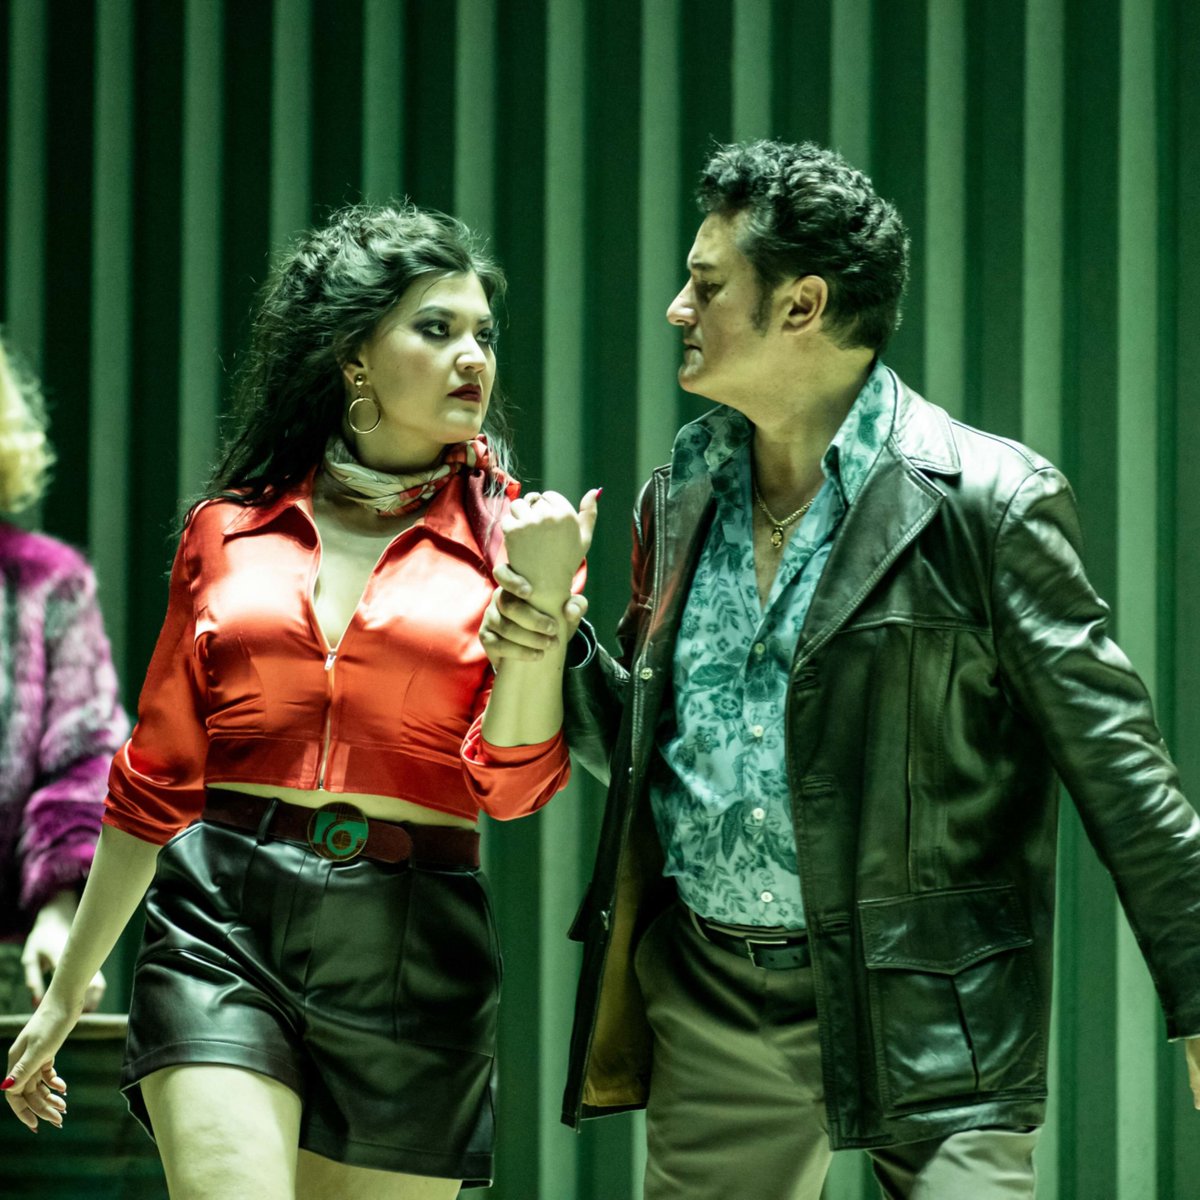 One of opera’s most notorious free spirits – Carmen is rebel with a passionate cause 🥀 Damiano Michieletto's searing new production of Bizet’s ever-popular opera opens on our Main Stage tonight. Book your seats today: bit.ly/3TyOT36